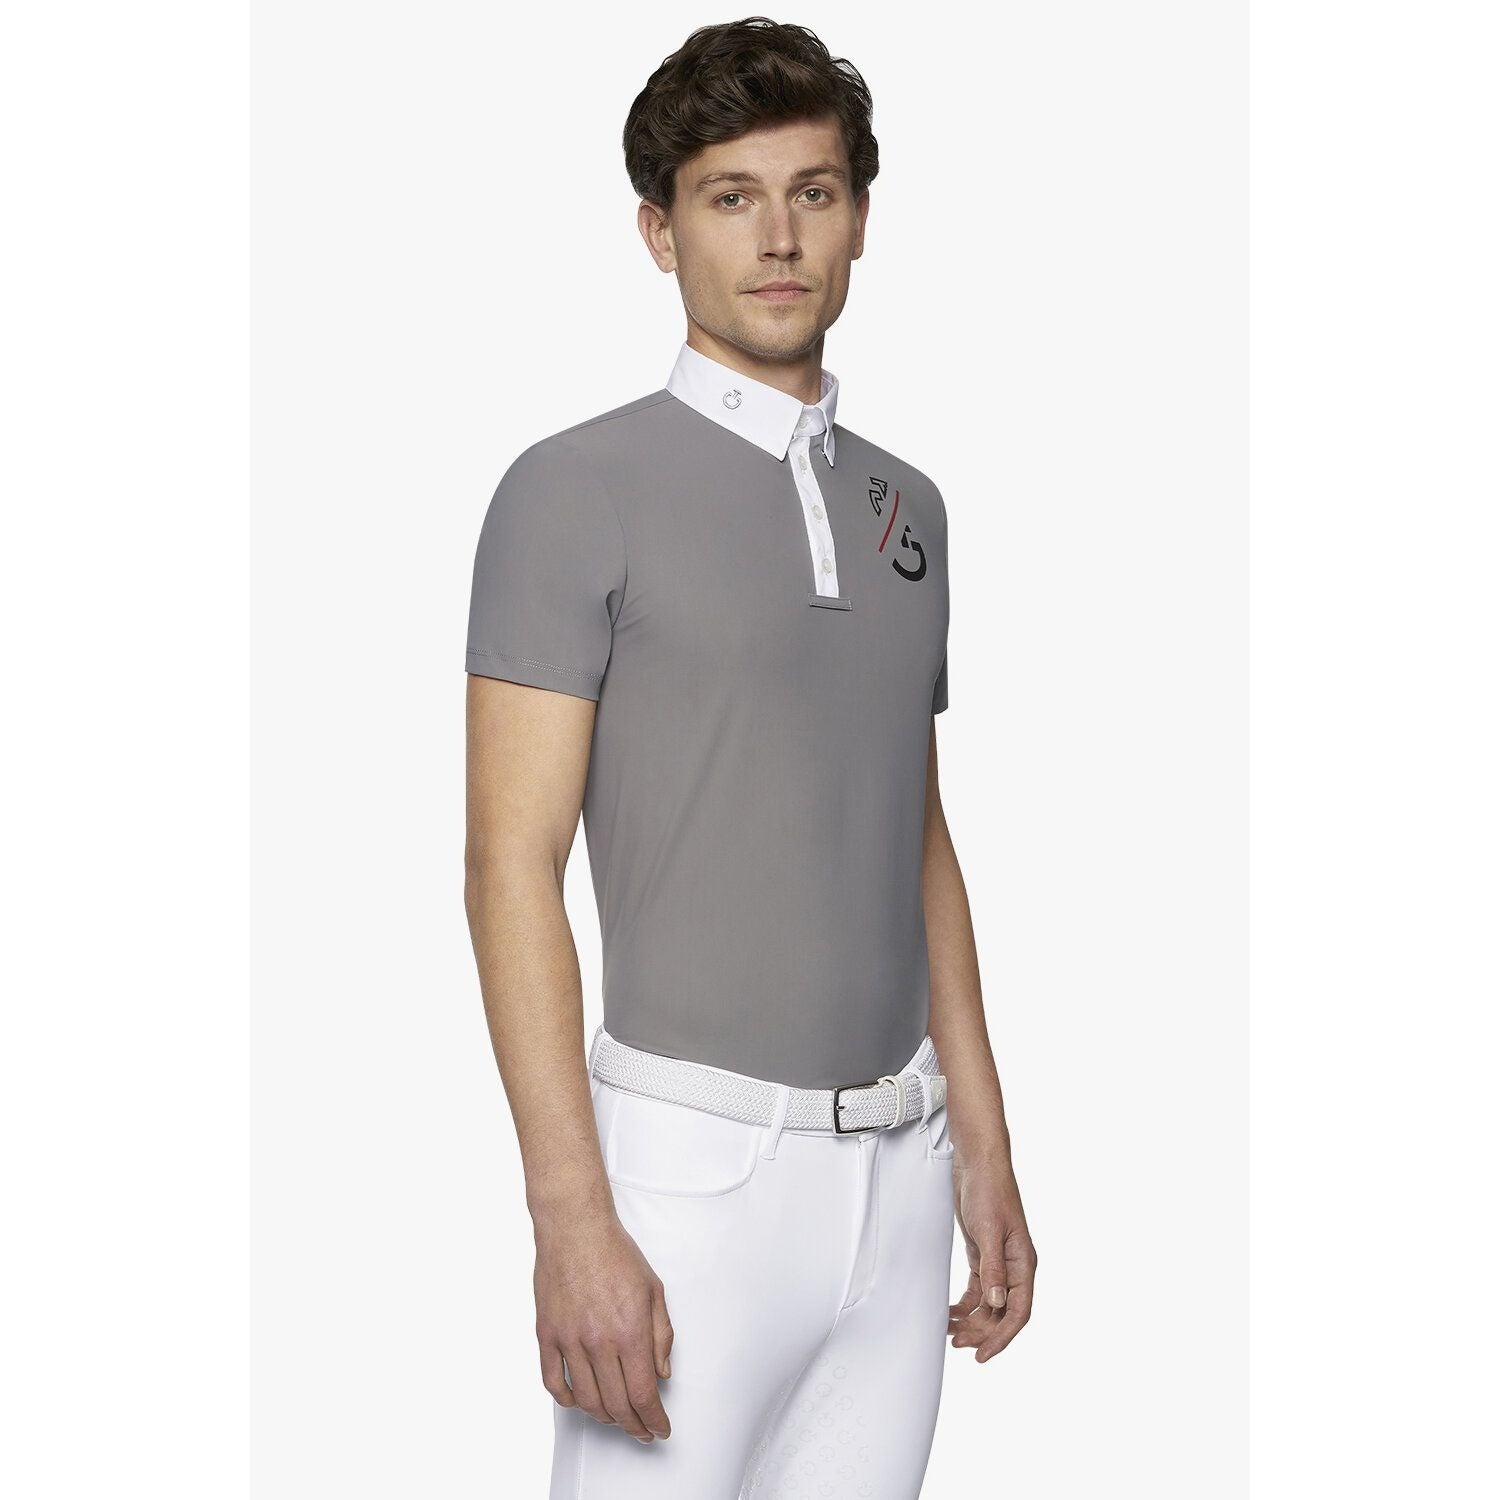 CT Men's Team S/S Jersey Competition Polo Grey